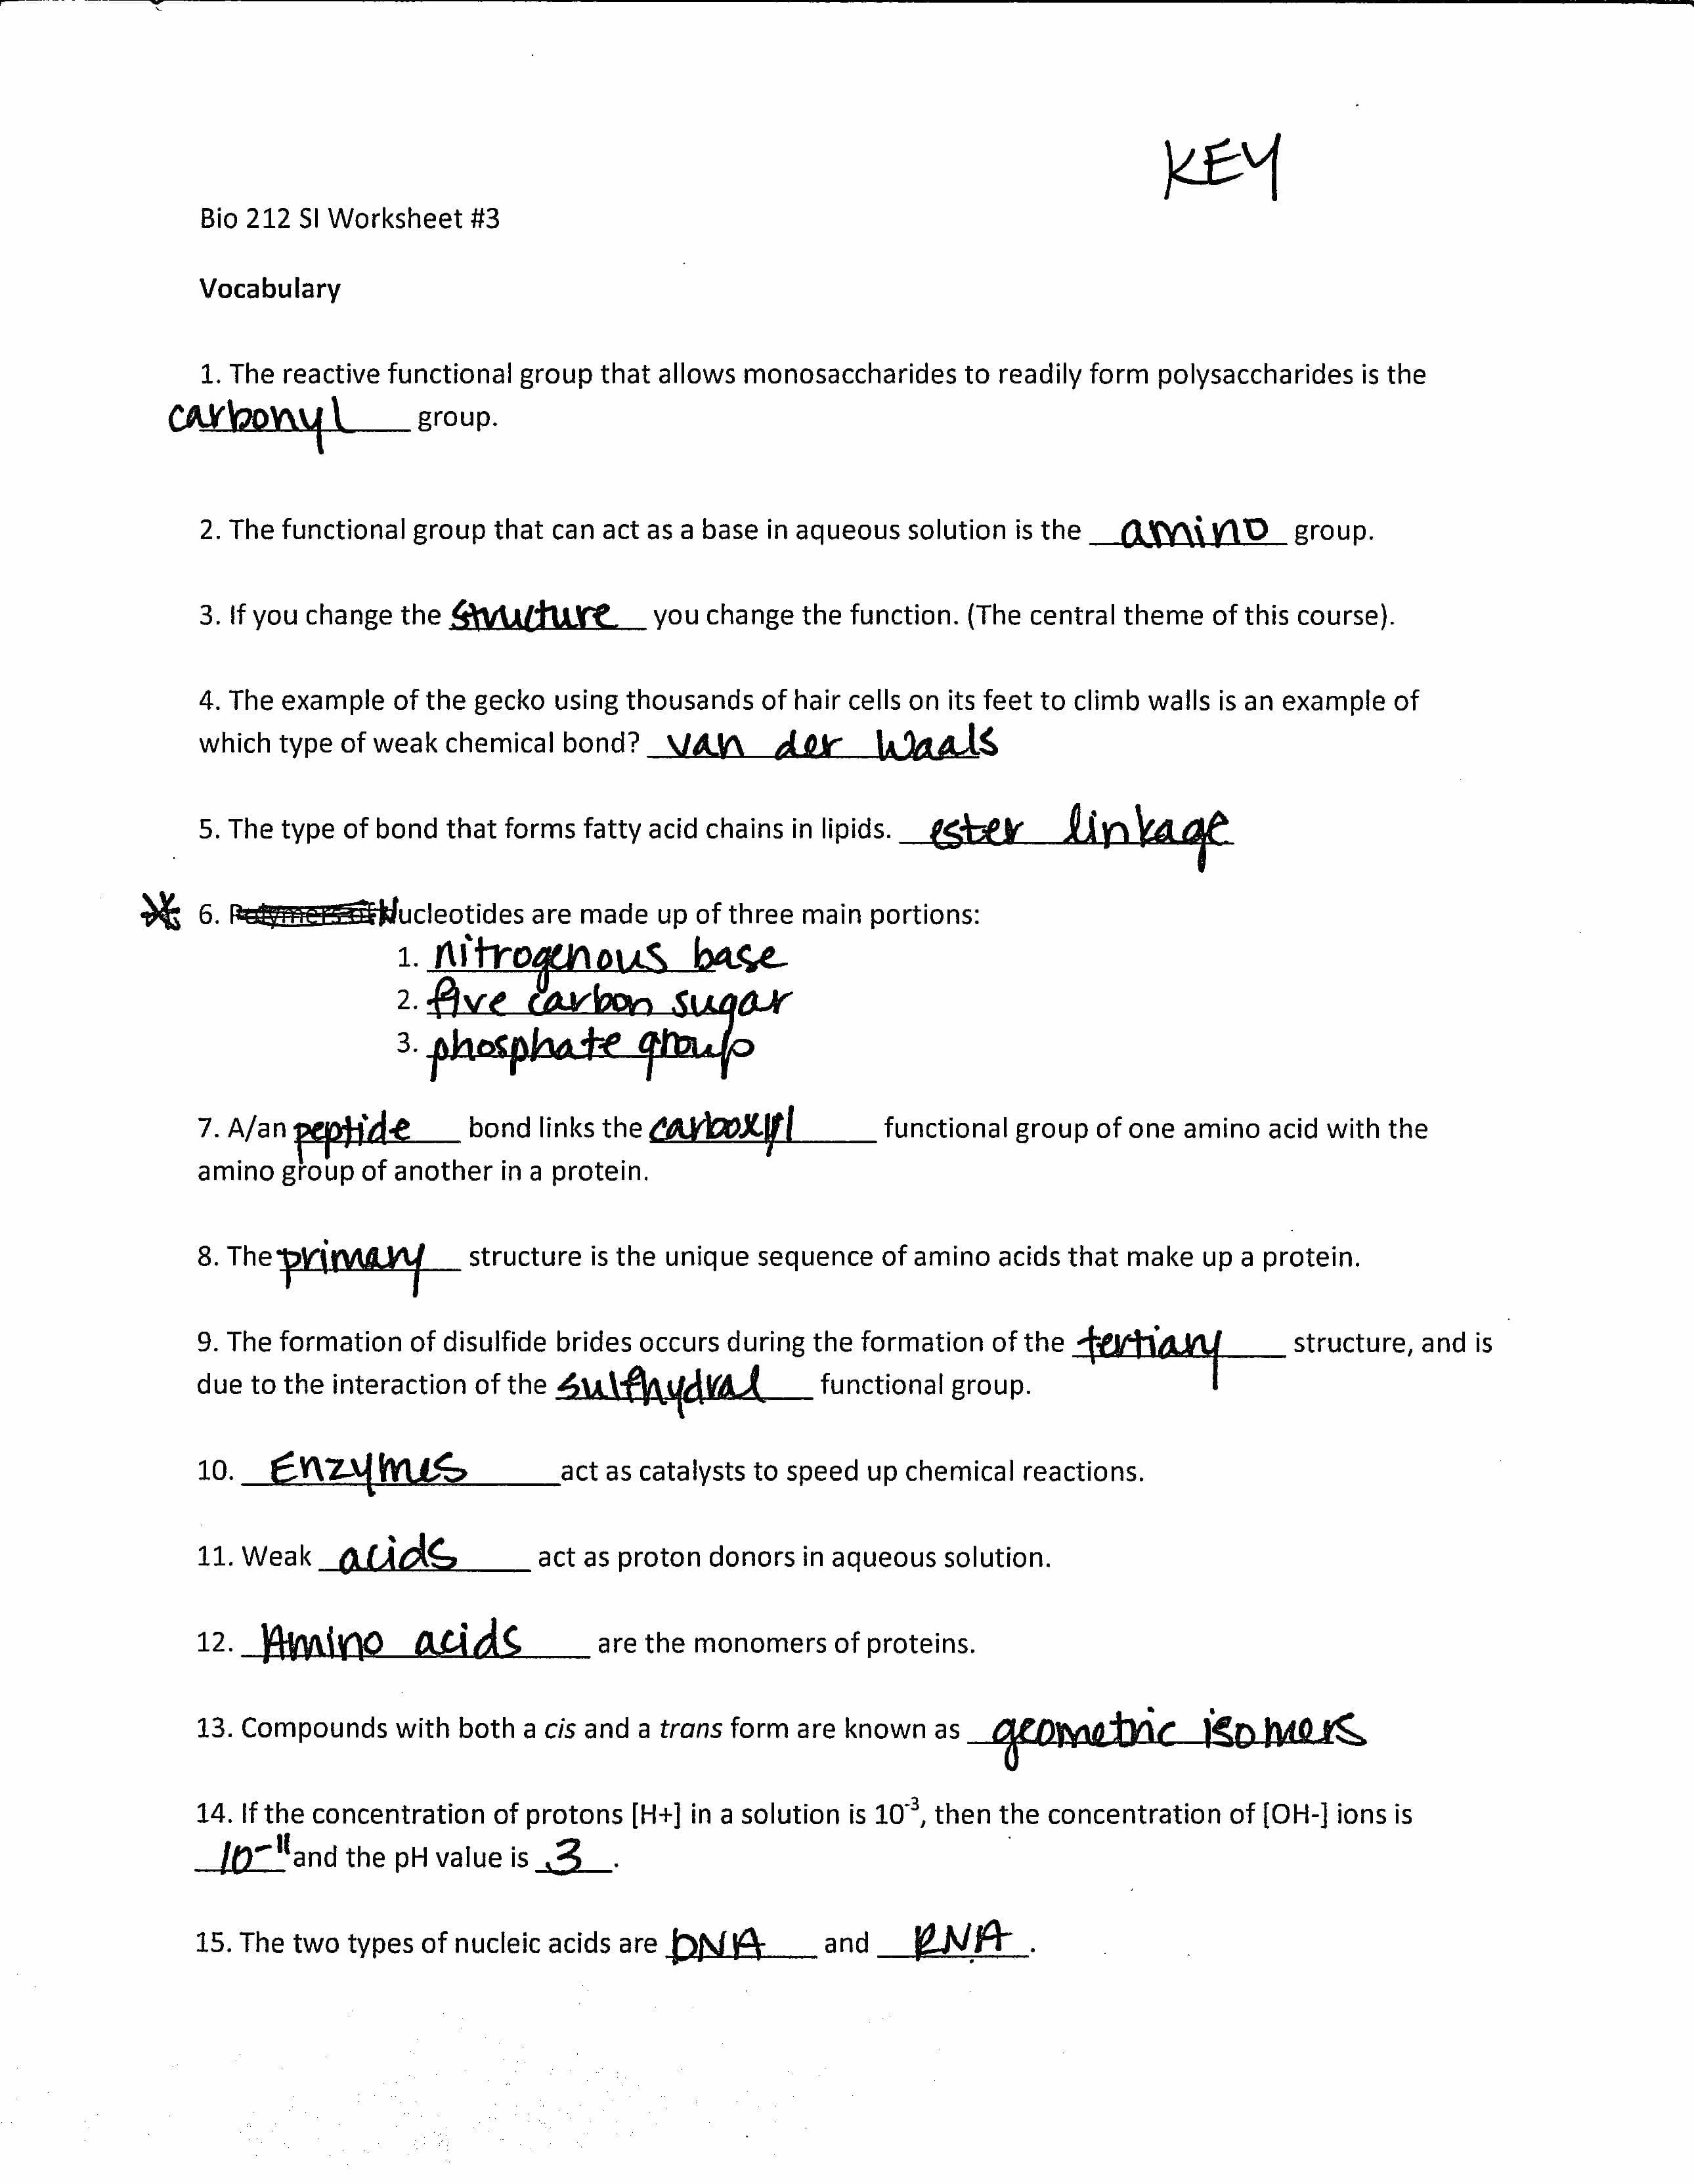 Dna And Replication Worksheet Answers Adding And Subtracting Together With Dna Replication Worksheet Pdf